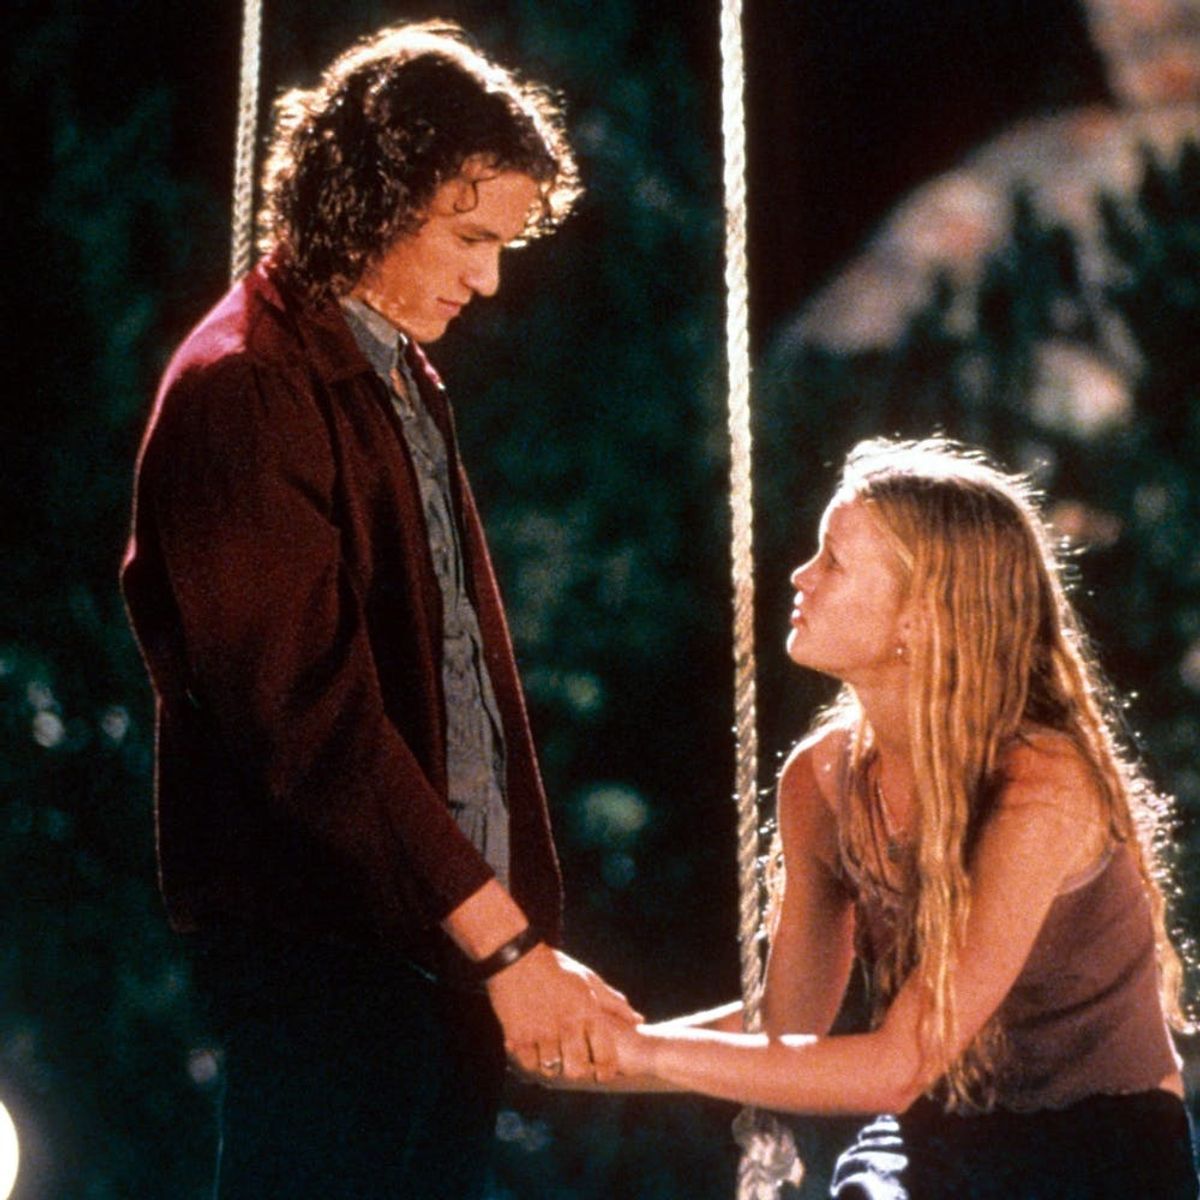 As ’10 Things I Hate About You’ Turns 20, Fans Remember Its Spot-On Lesson About Consent